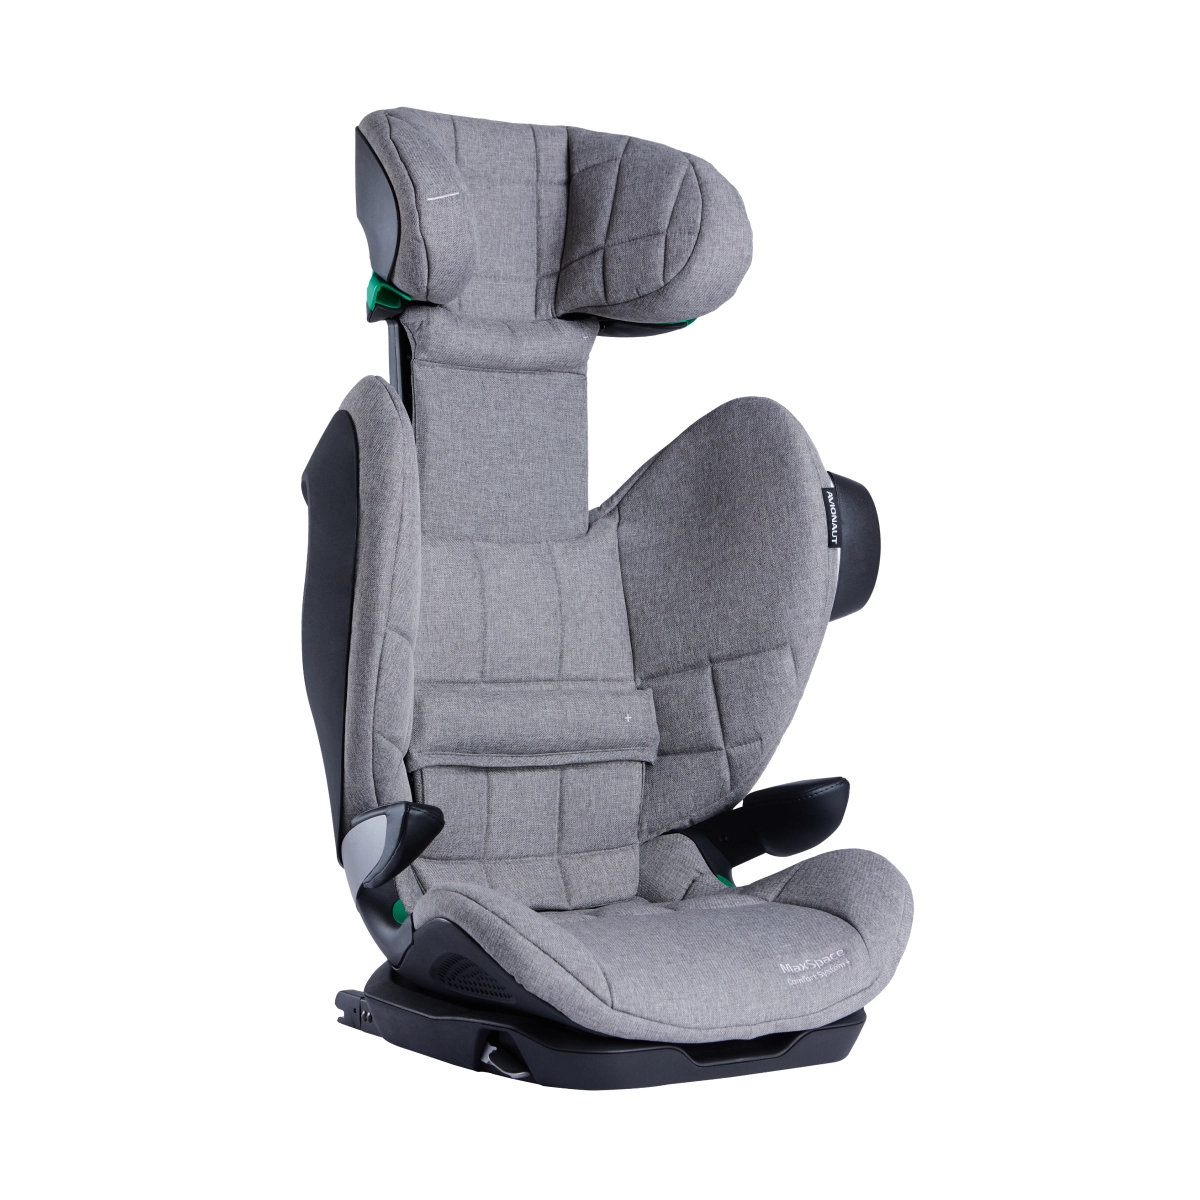 Avionaut MaxSpace Comfort System+ Group 2/3 Car Seat in Grey